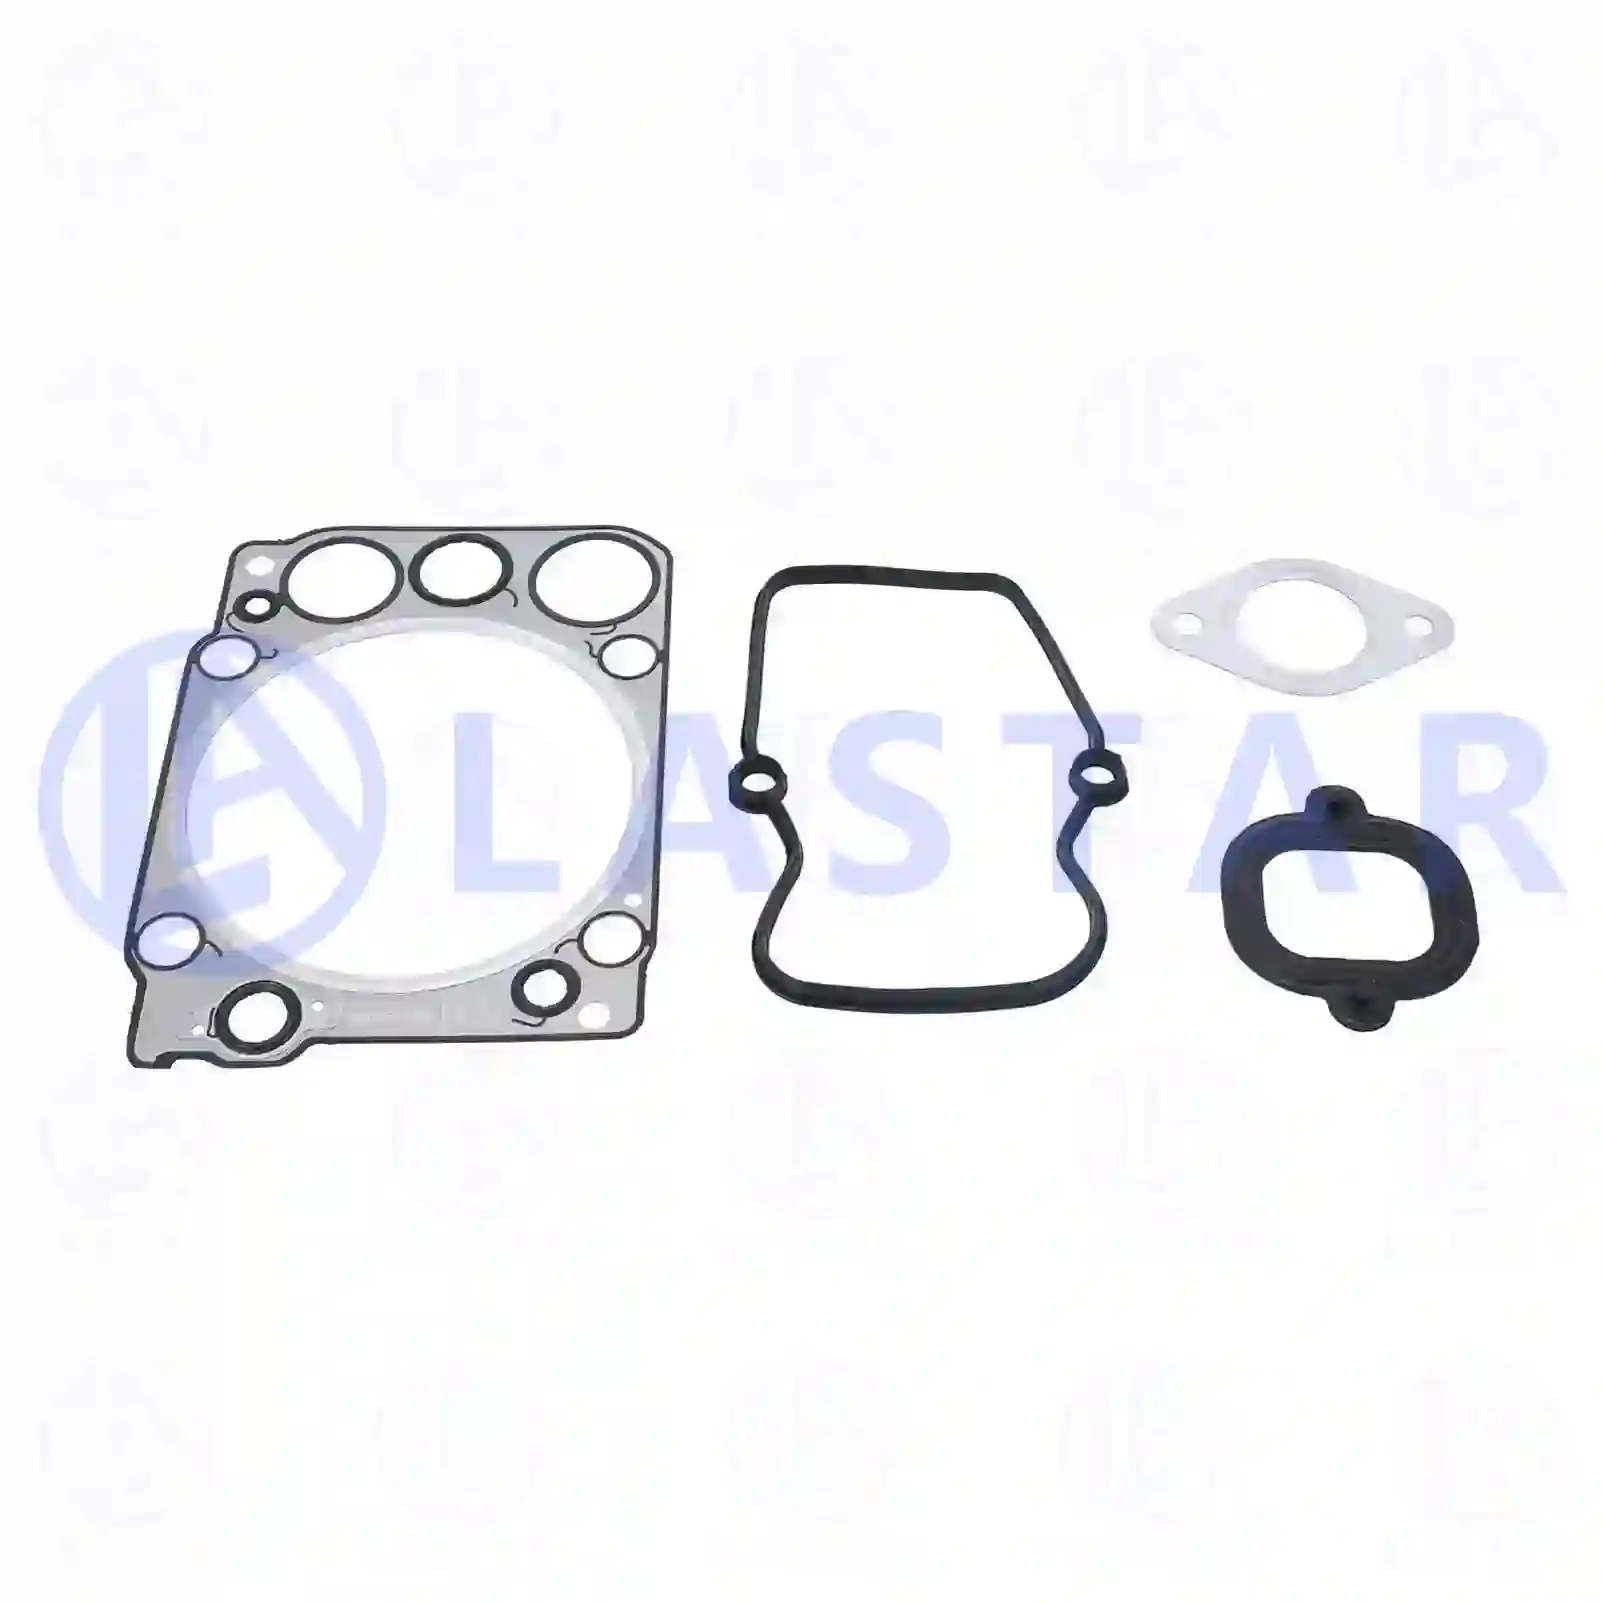 General Overhaul Kits, Engine Cylinder head gasket kit, la no: 77702693 ,  oem no:4570160221S2, 4601420080S2, 5410101621S2, 5410161720S2, 5410980480S2 Lastar Spare Part | Truck Spare Parts, Auotomotive Spare Parts